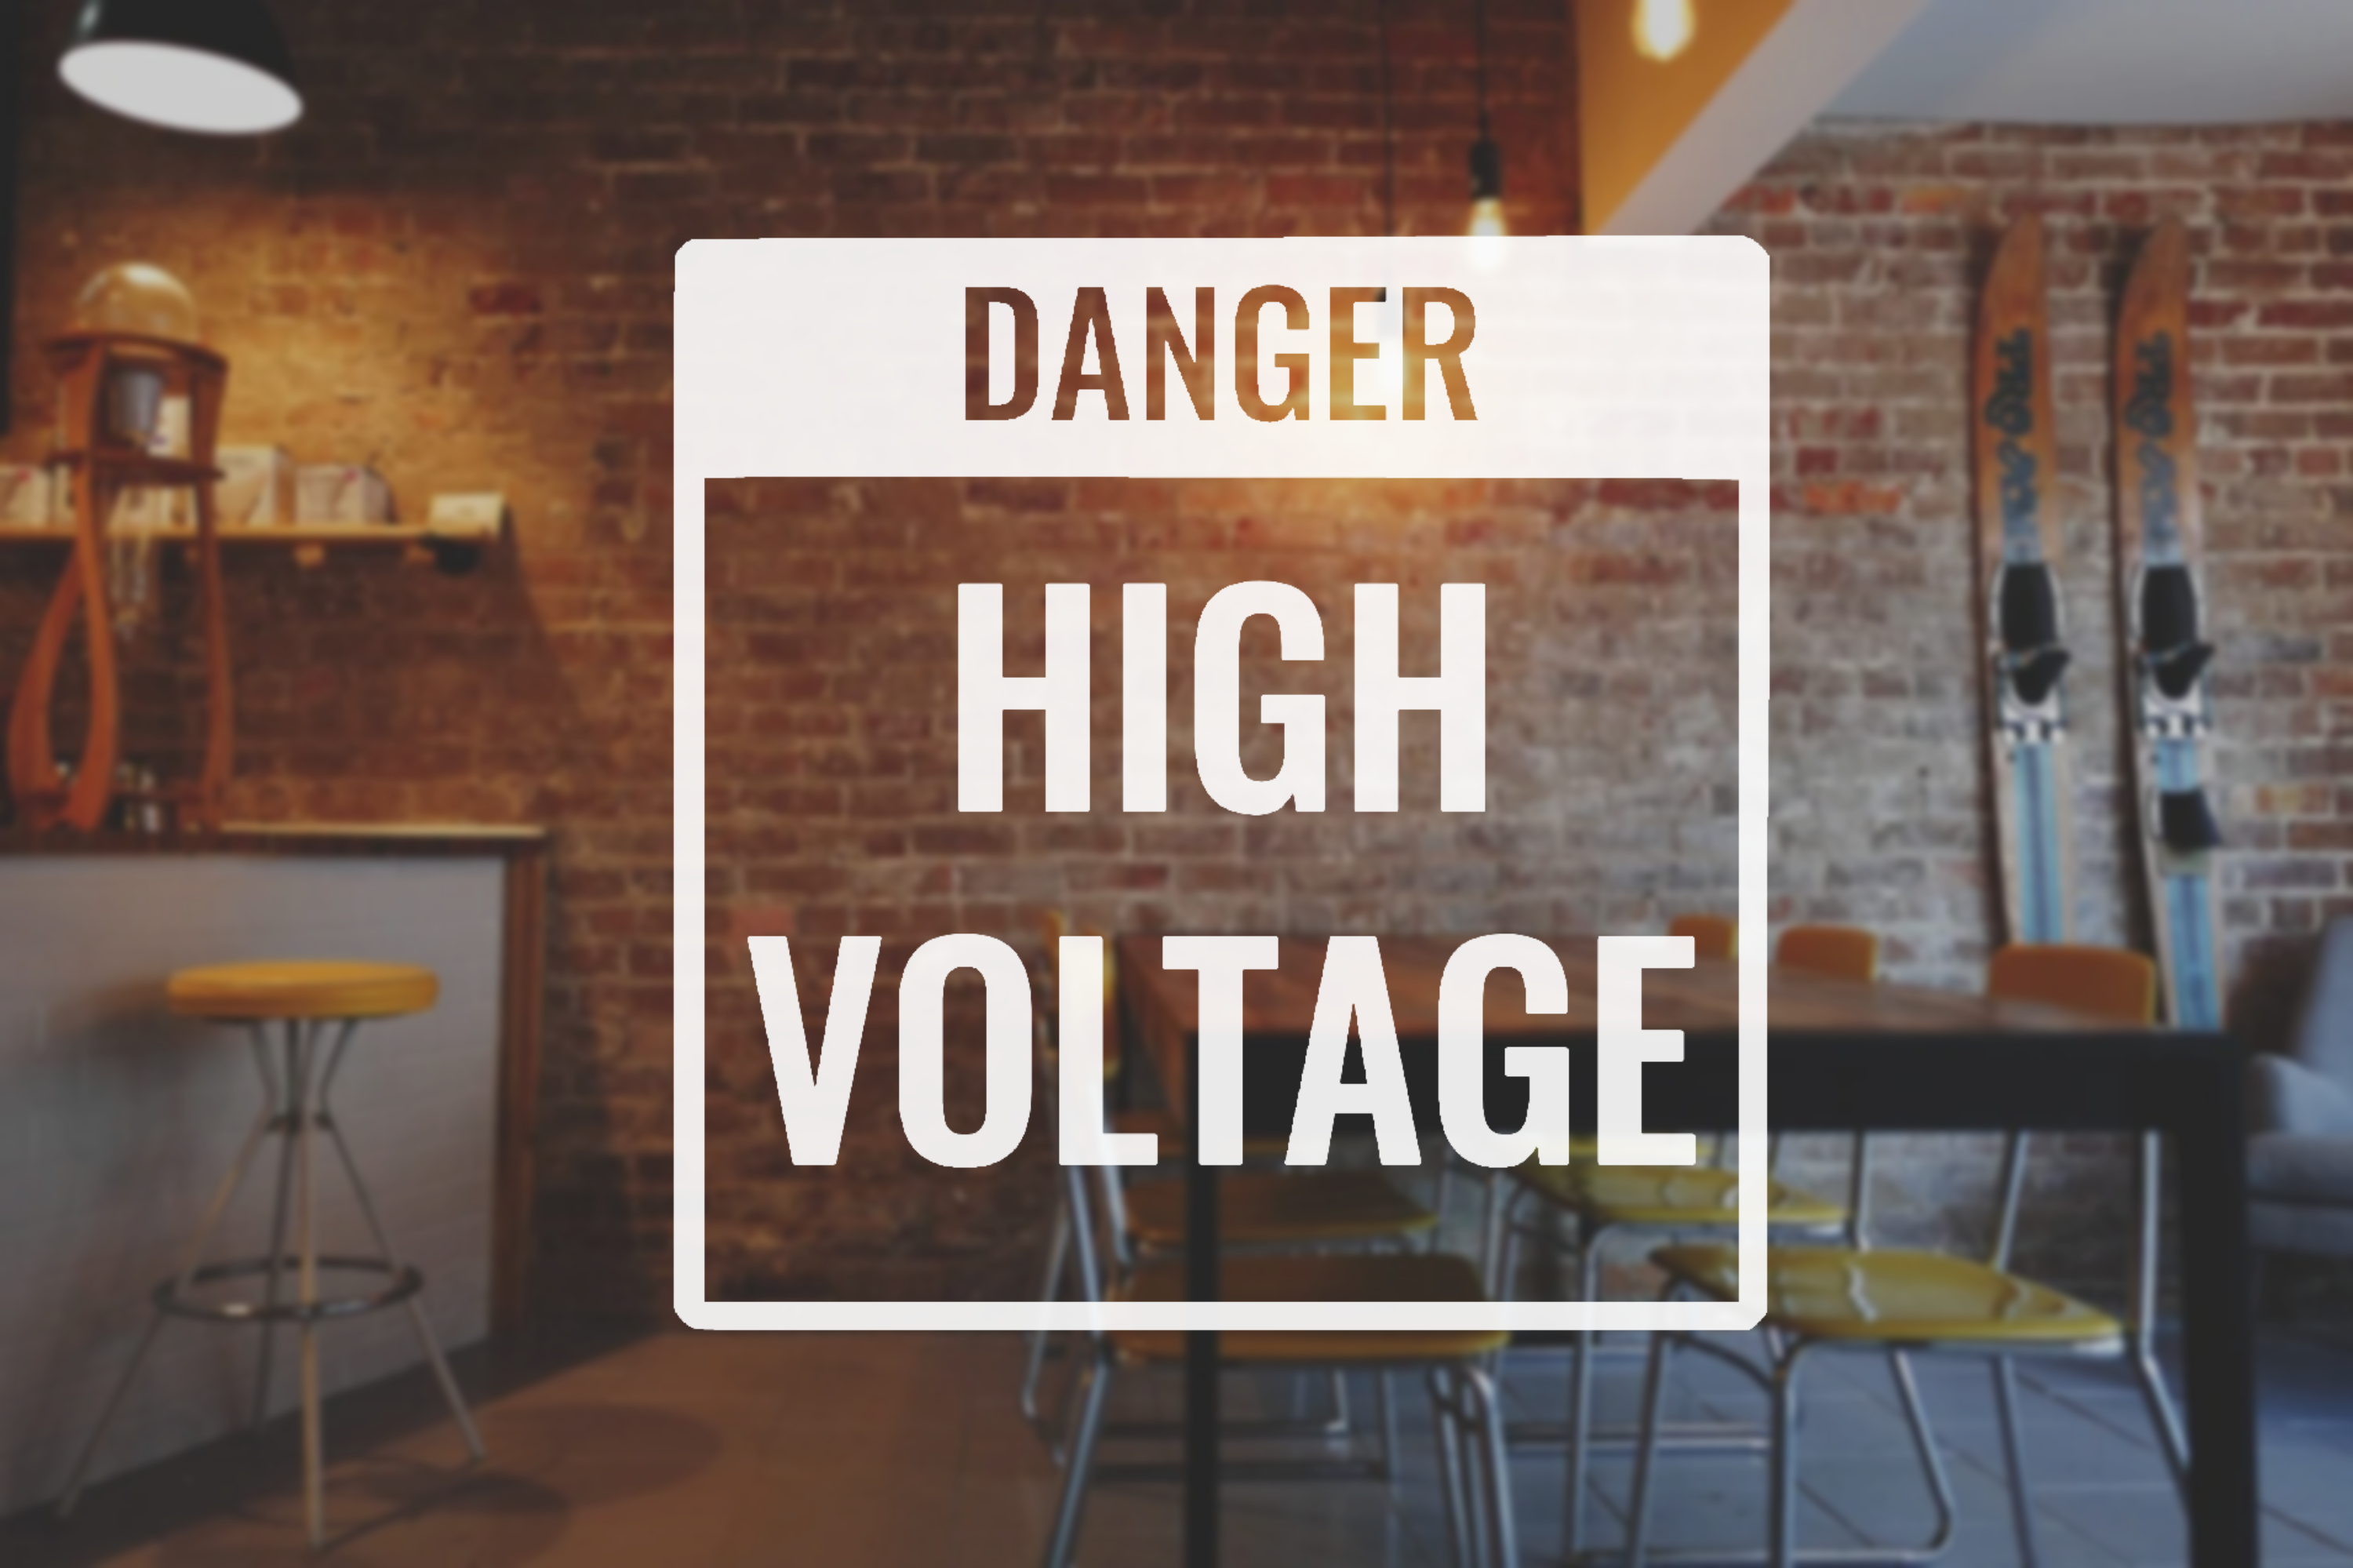 Danger High Voltage Square Decal - Vinyl Sticker for Businesses, Stores, Bars, Coffee Shops, Eatery, Cafeteria, Food Truck!